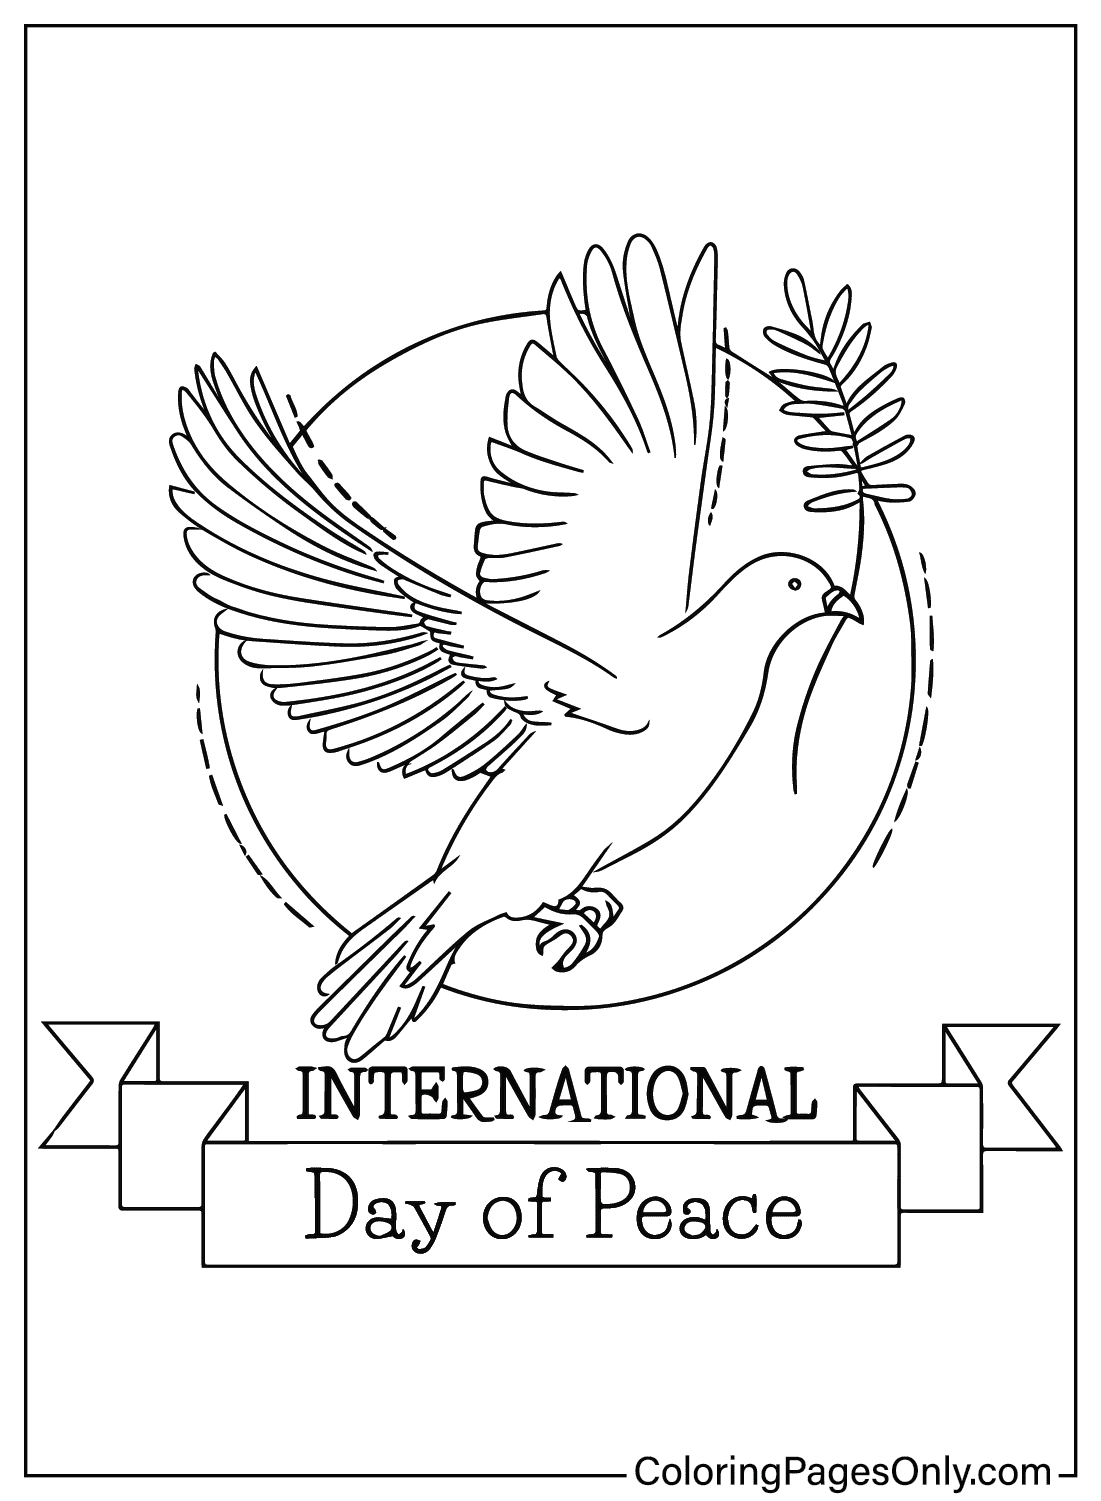 International Day of Peace Coloring Sheet